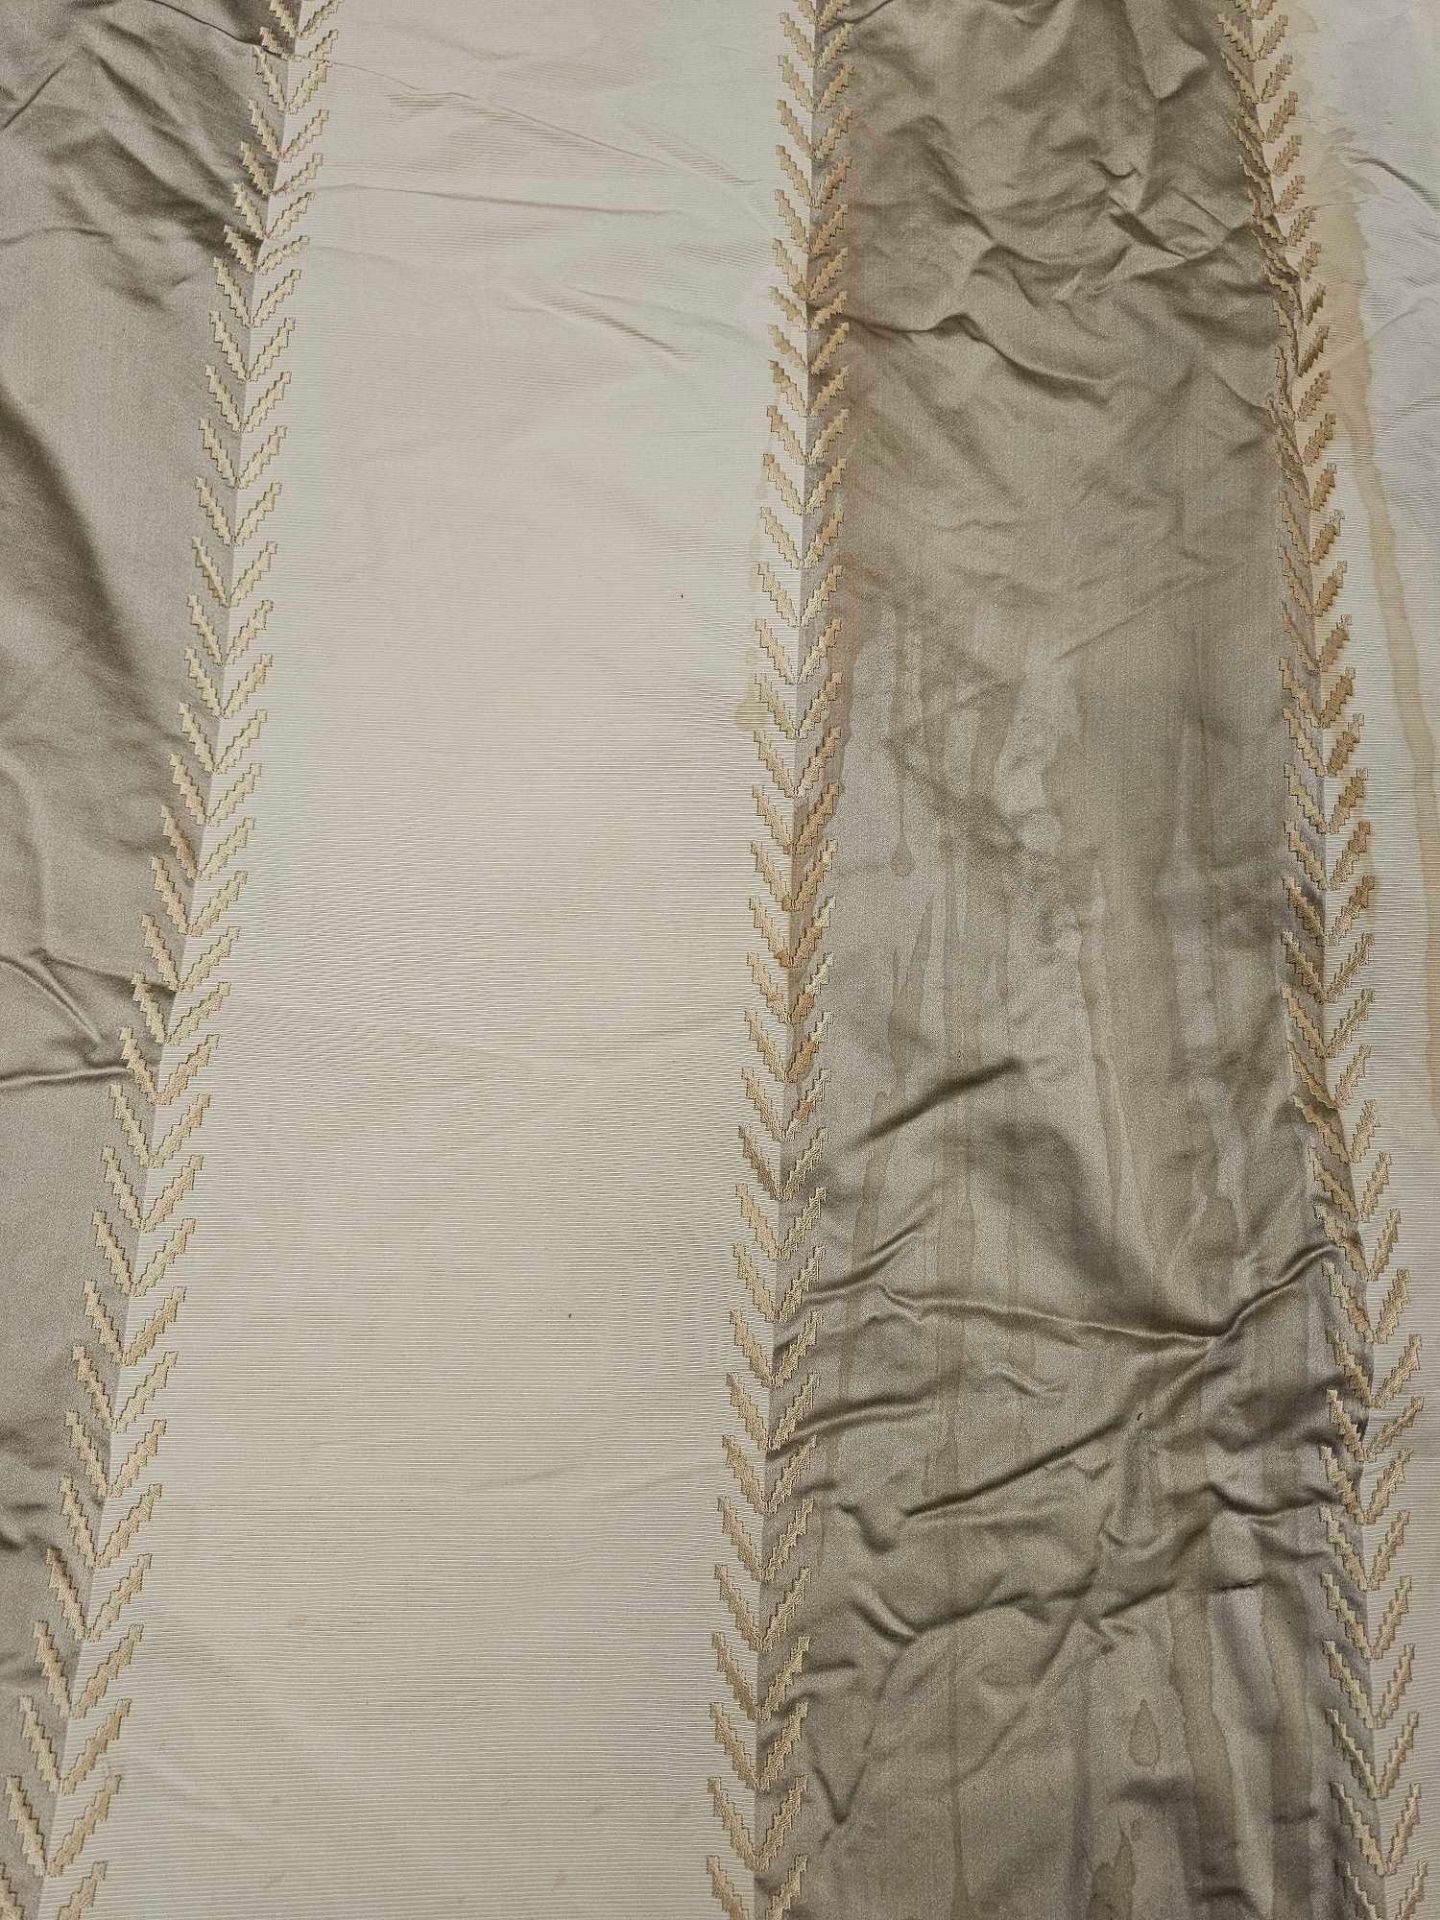 Single Cream And Silver Silk Drapes Brown Piping Arrow Pattern Size -cm 95 x 262 Ref Dorch 80 Single - Image 4 of 5